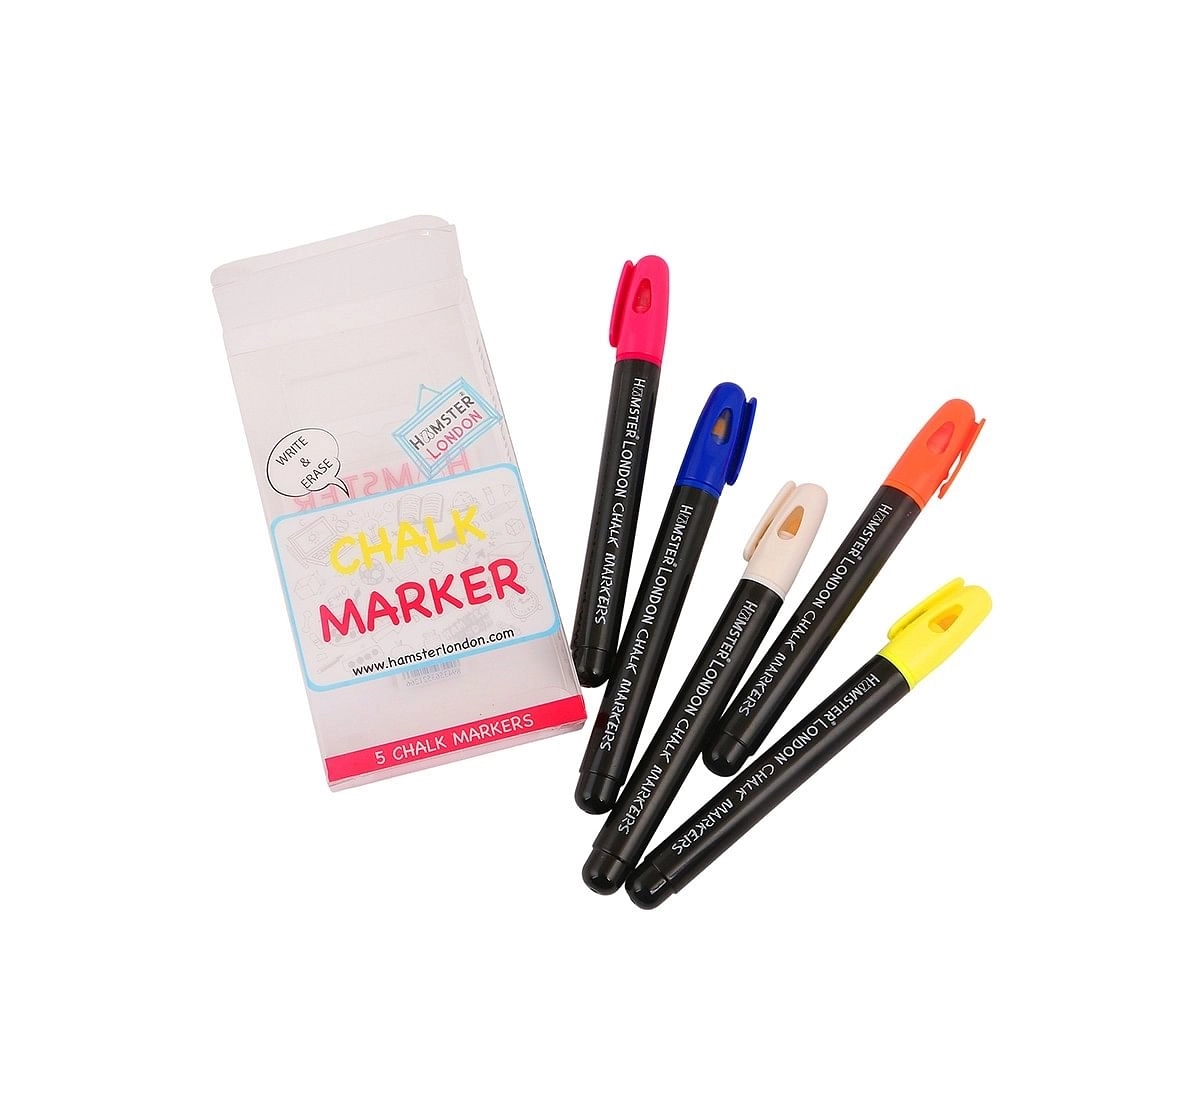 Hamster London Chalk Markers Set of 5 for Kids age 3Y+